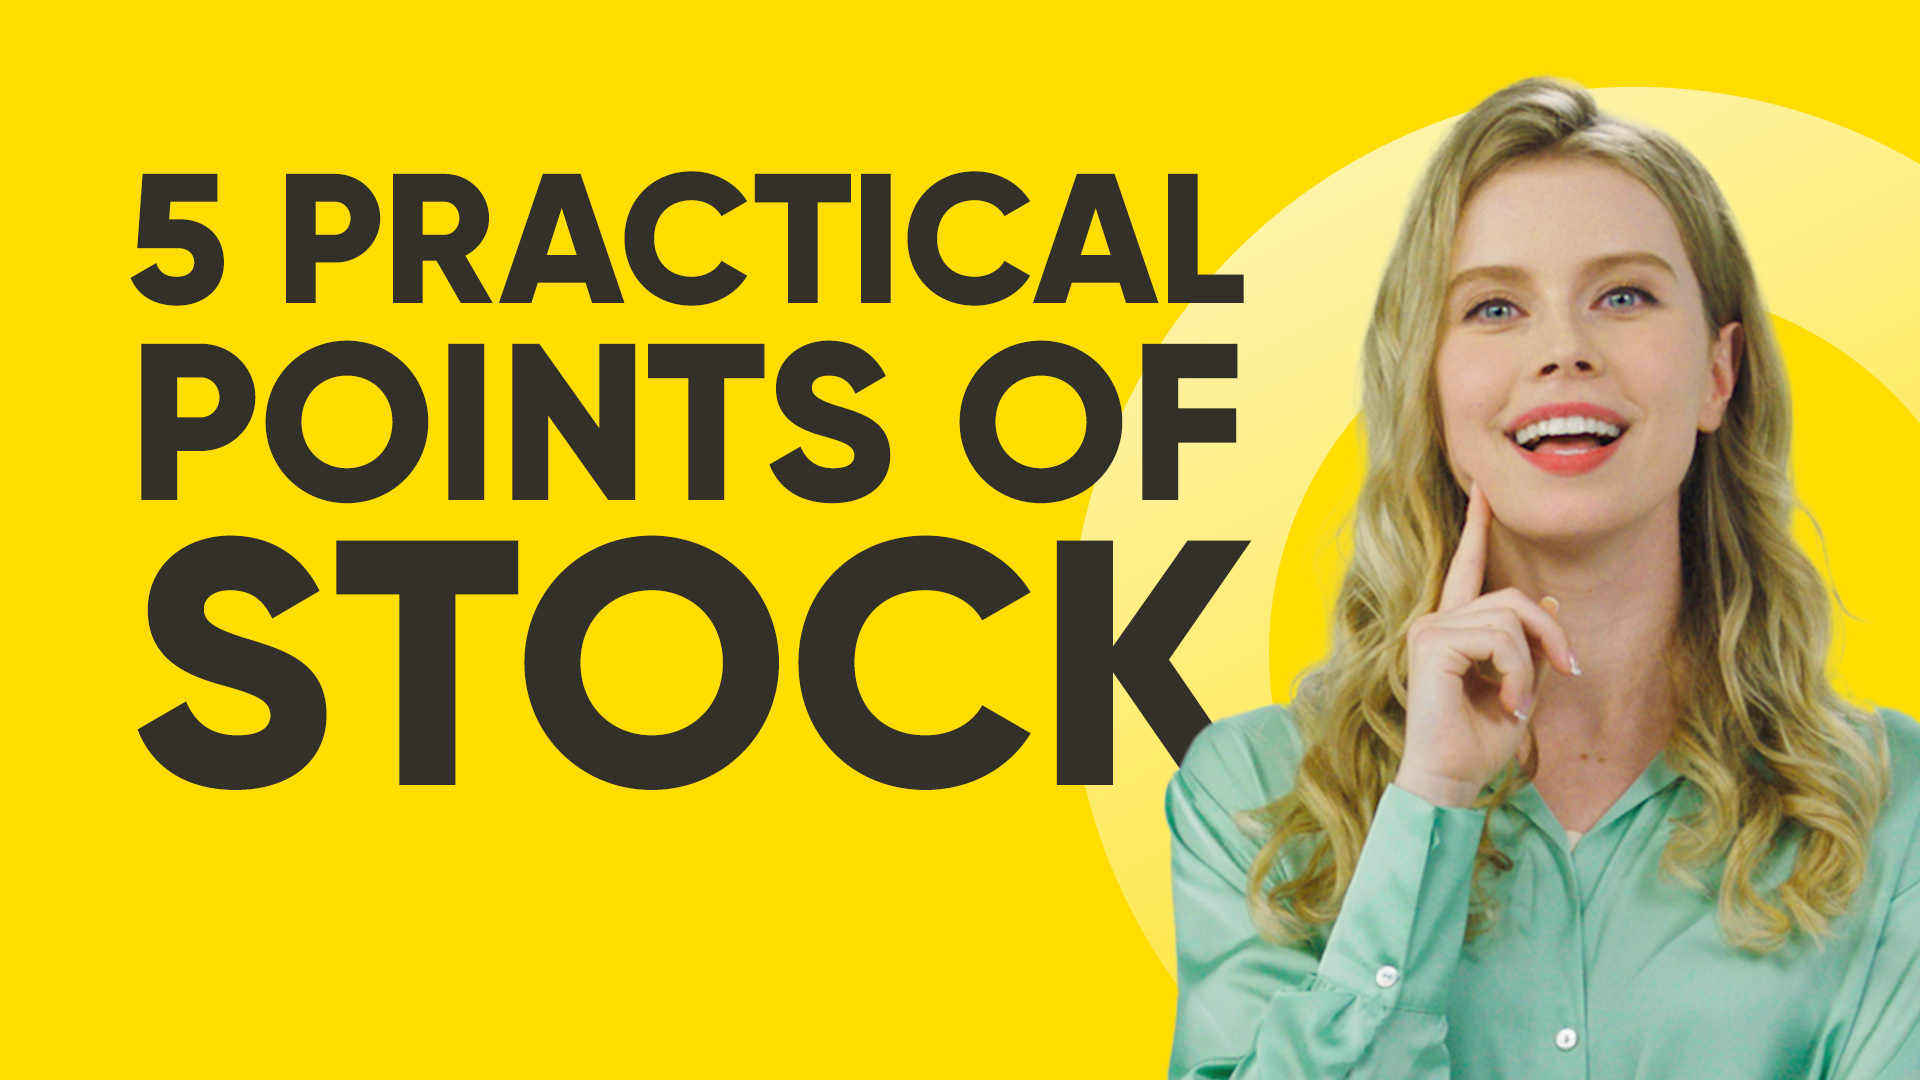 Lesson3: Five important practical points for US stocks